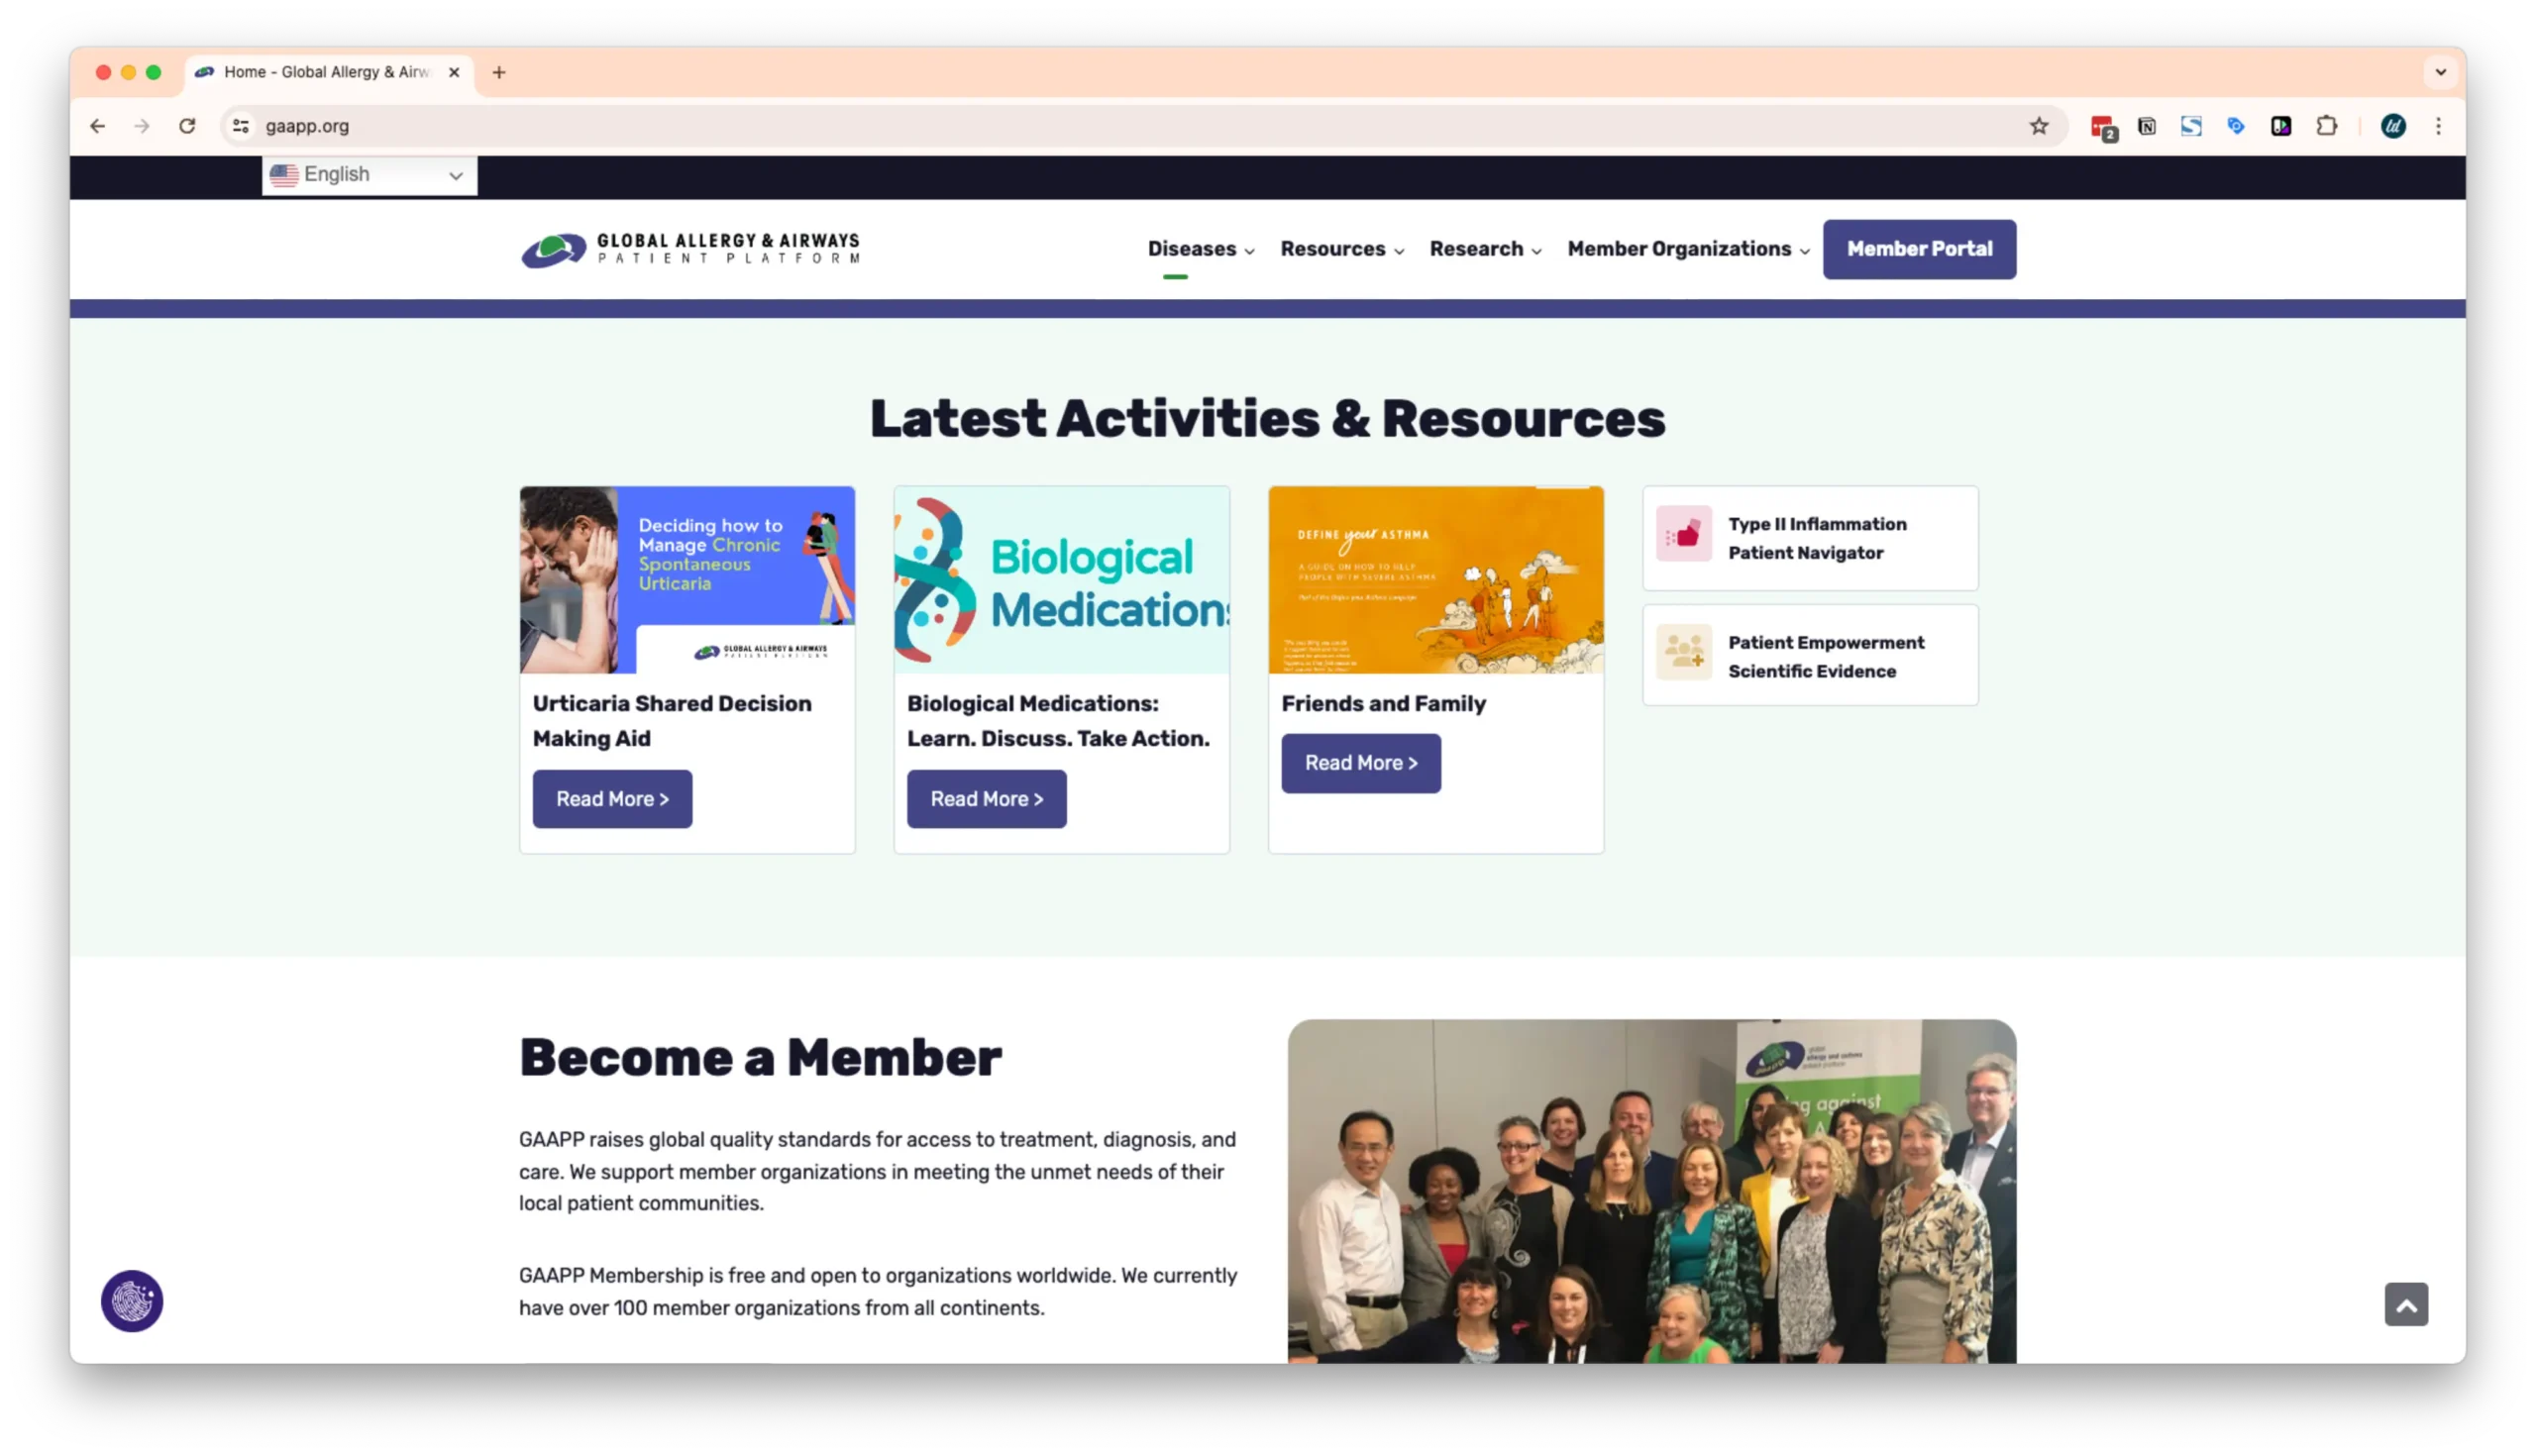 A webpage from the Global Allergy & Airways Patient Platform showcasing the latest activities and resources. It features links to various aids and educational materials, a section to become a member, and a group photo of members.